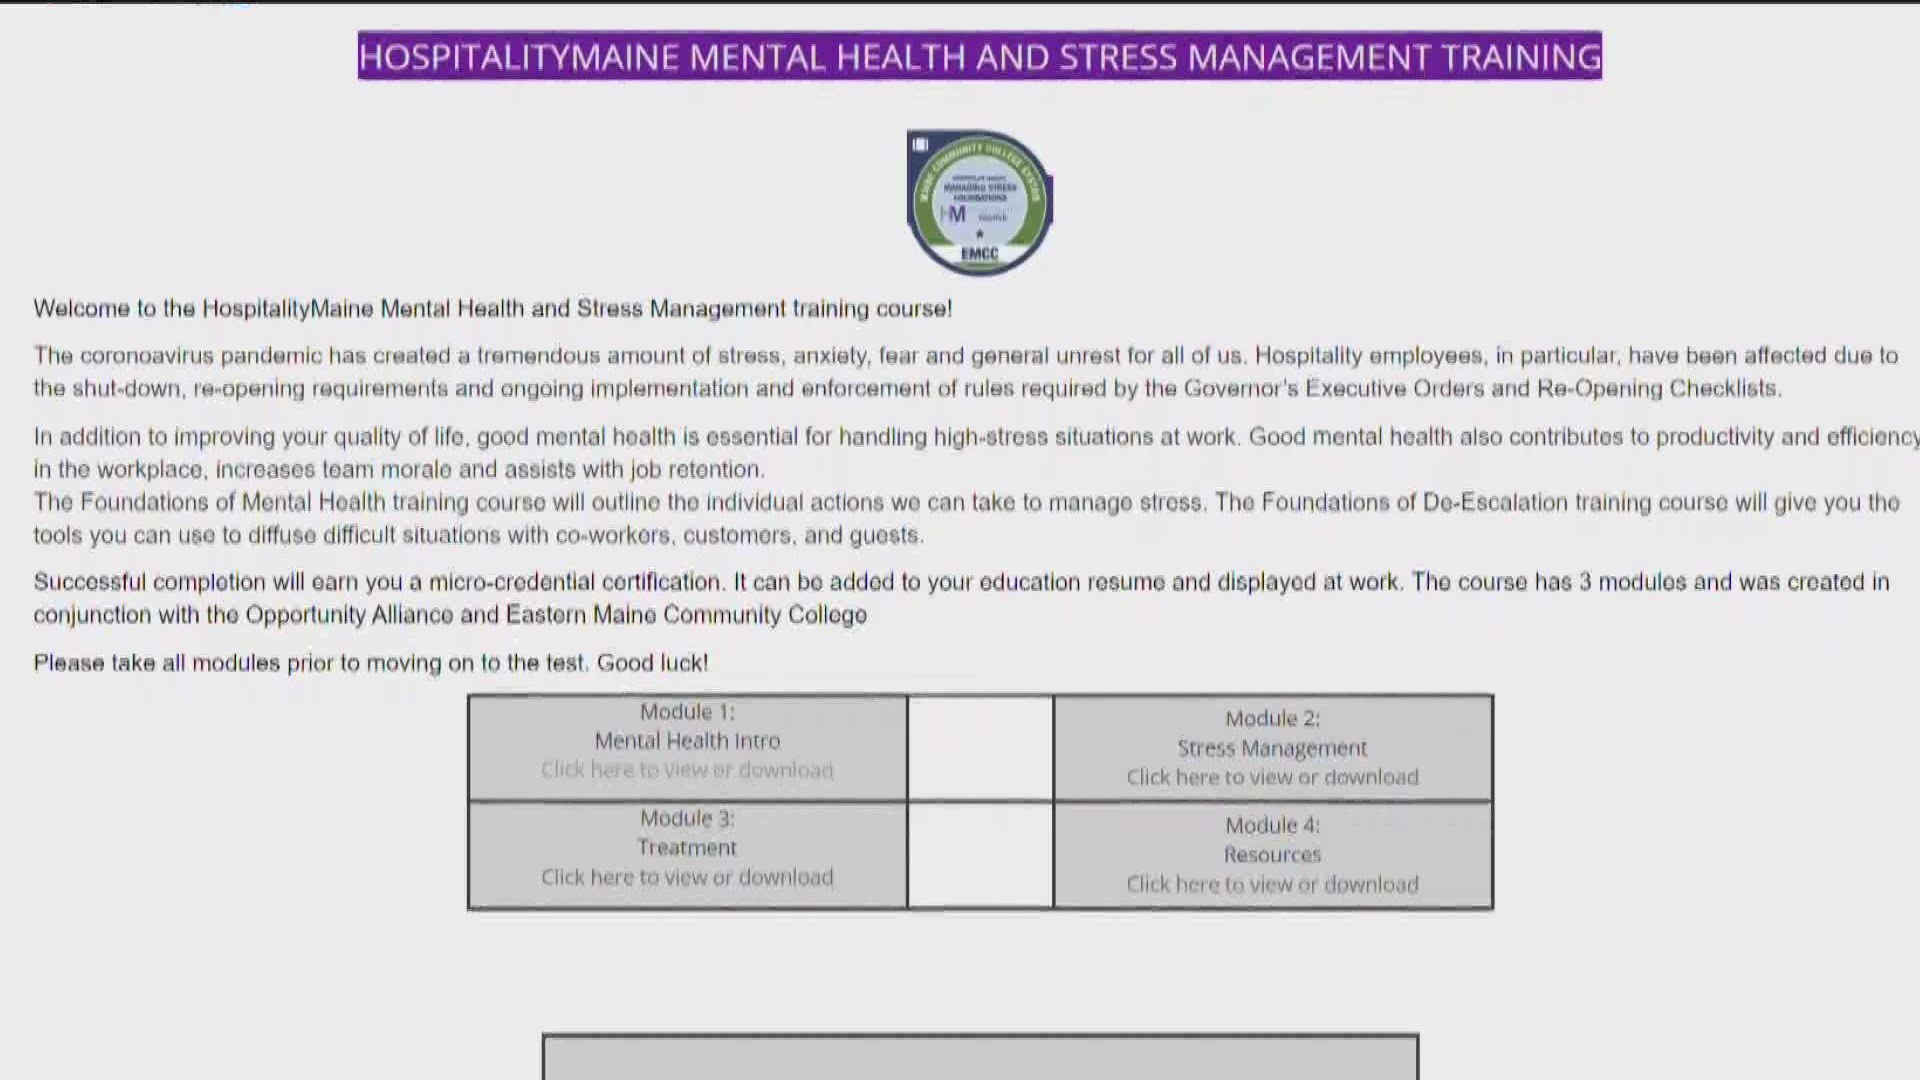 HospitalityMaine offering stress management online courses for frontline workers amid coronavirus, COVID-19 pandemic